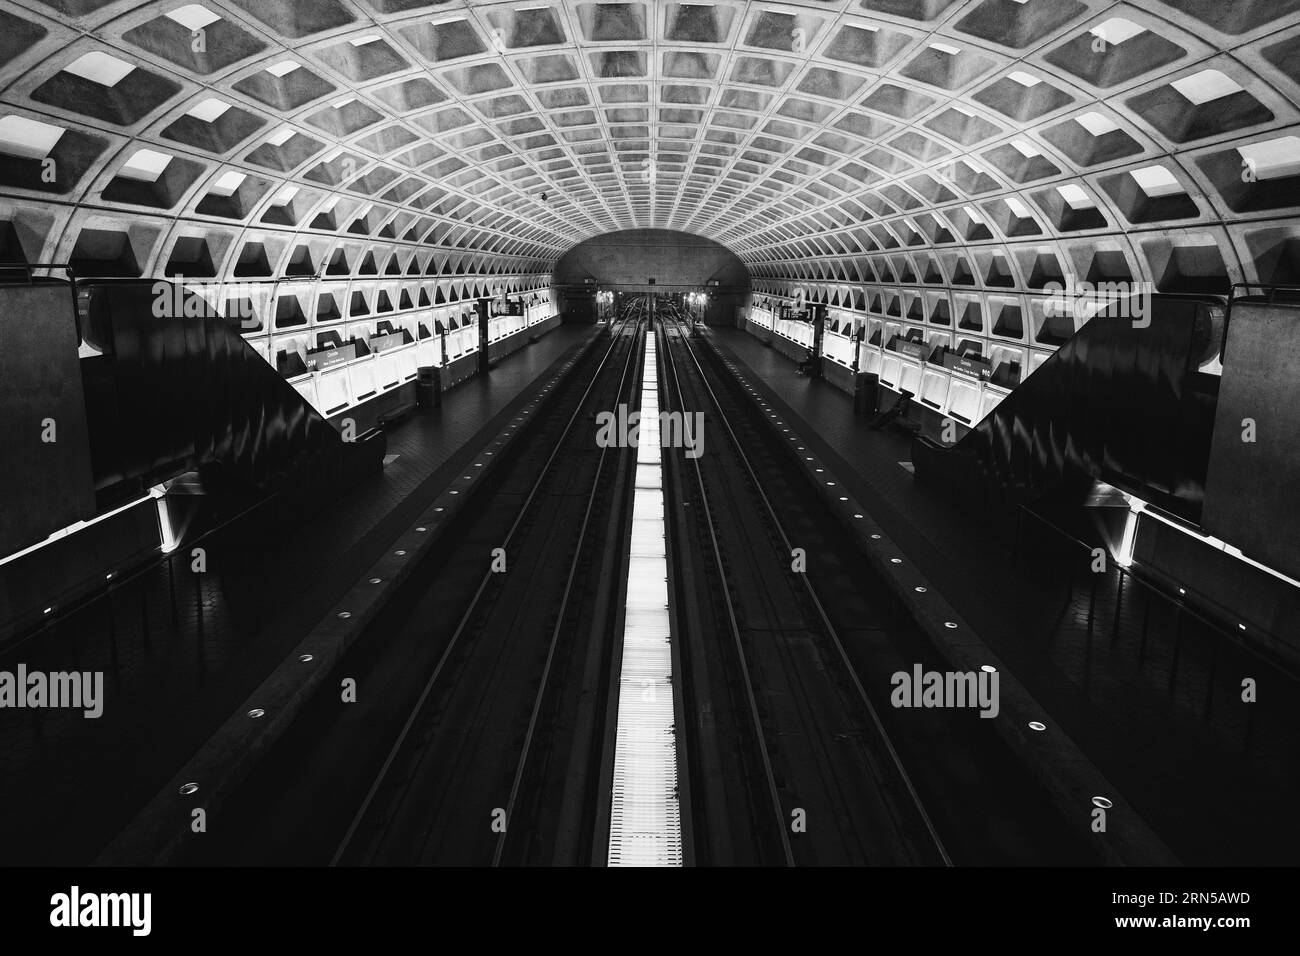 WASHINGTON DC, United States — Commuters move about the platform of a Washington DC Metro station, representing one of the key transportation hubs that serve the nation's capital. The Metro system plays an essential role in the daily transit of thousands, connecting neighborhoods, business districts, and points of interest. Stock Photo